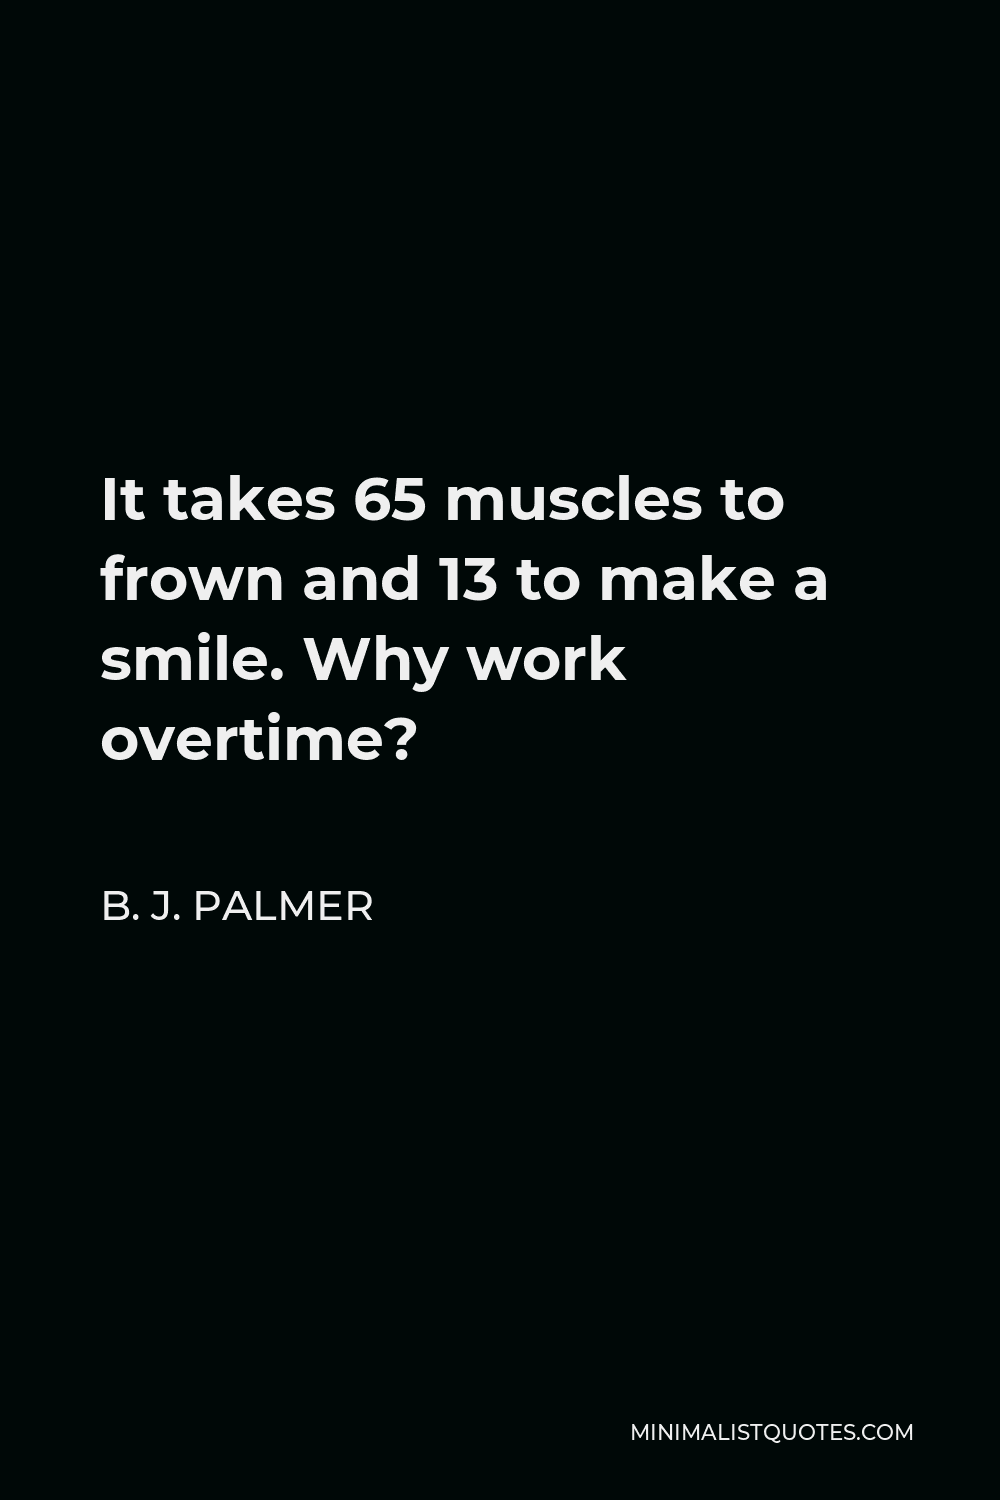 B. J. Palmer Quote - It takes 65 muscles to frown and 13 to make a smile. Why work overtime?